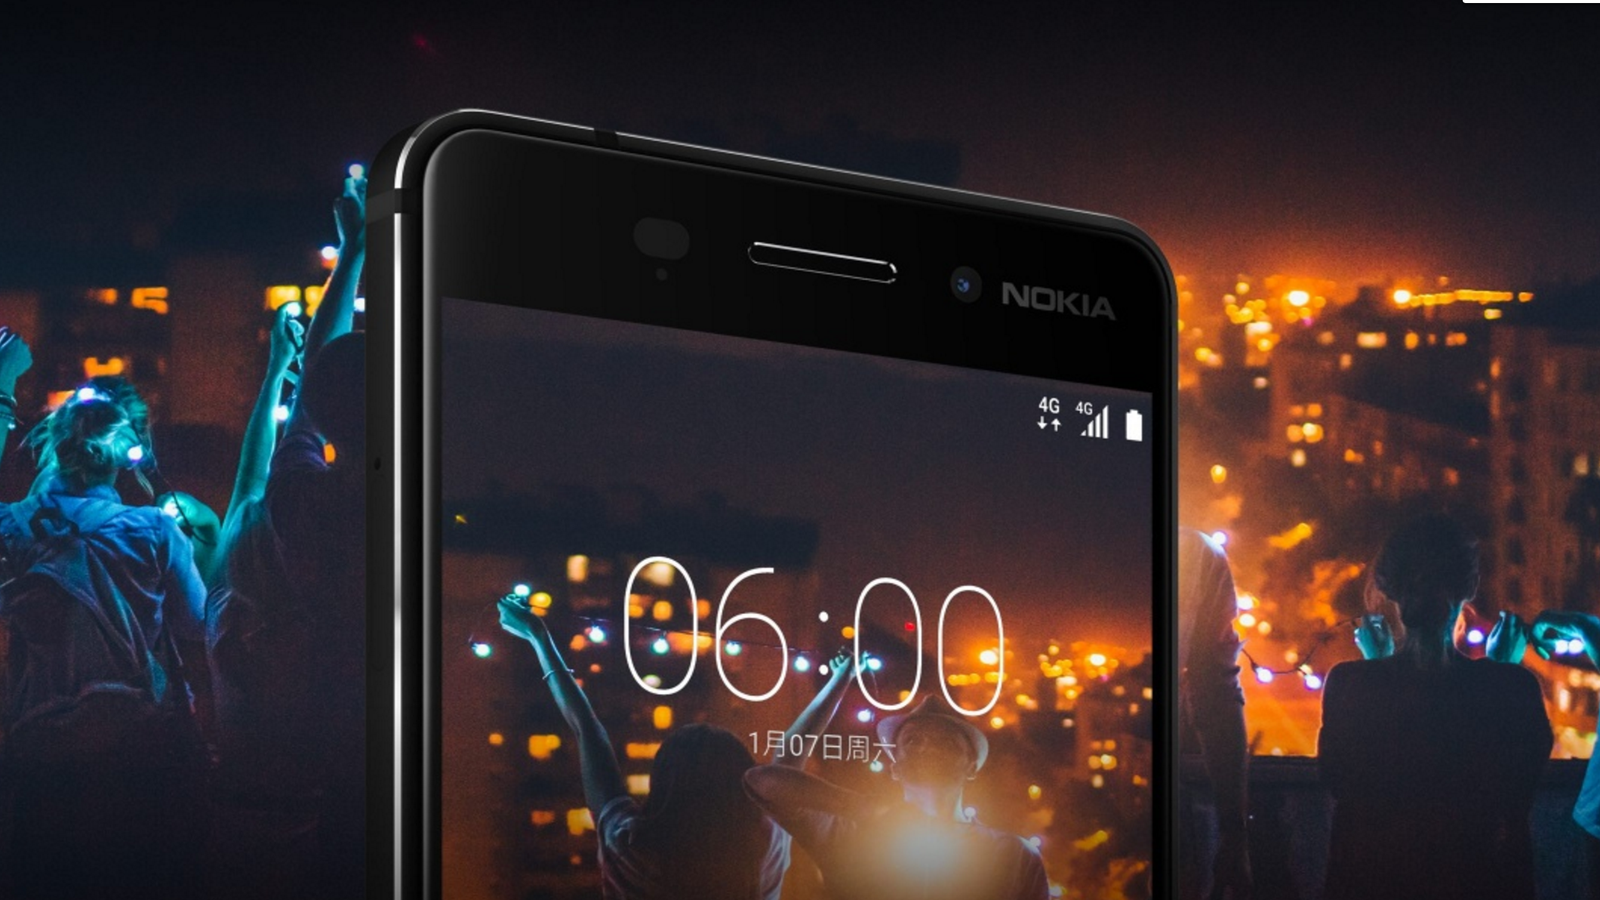 Nokia 5 and 6 received their August Android update